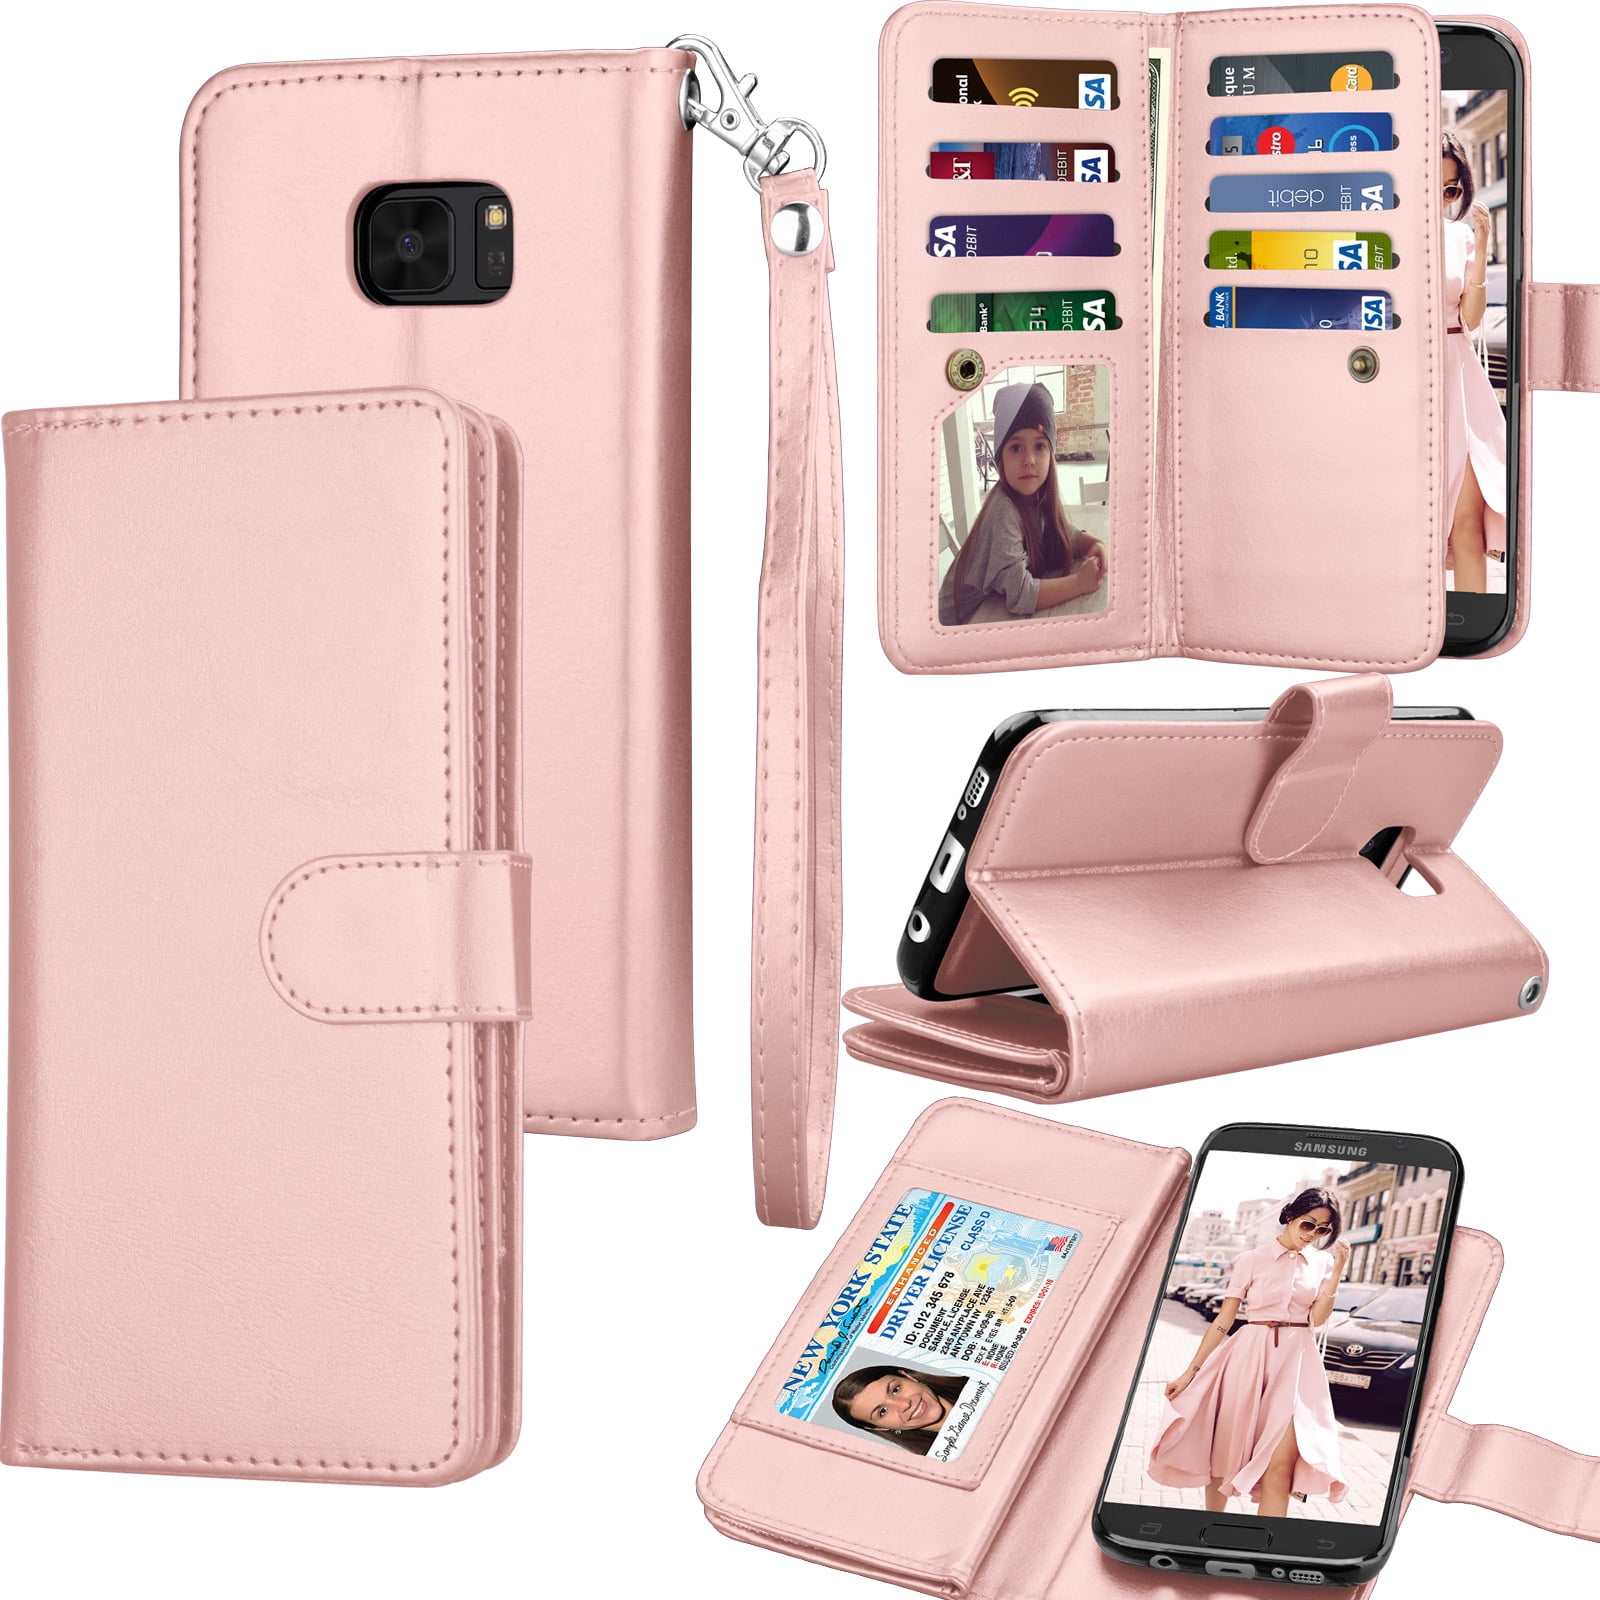 Cover for Leather Kickstand Card Holders Extra-Protective Business Mobile Phone case Flip Cover Samsung Galaxy S7 Flip Case 